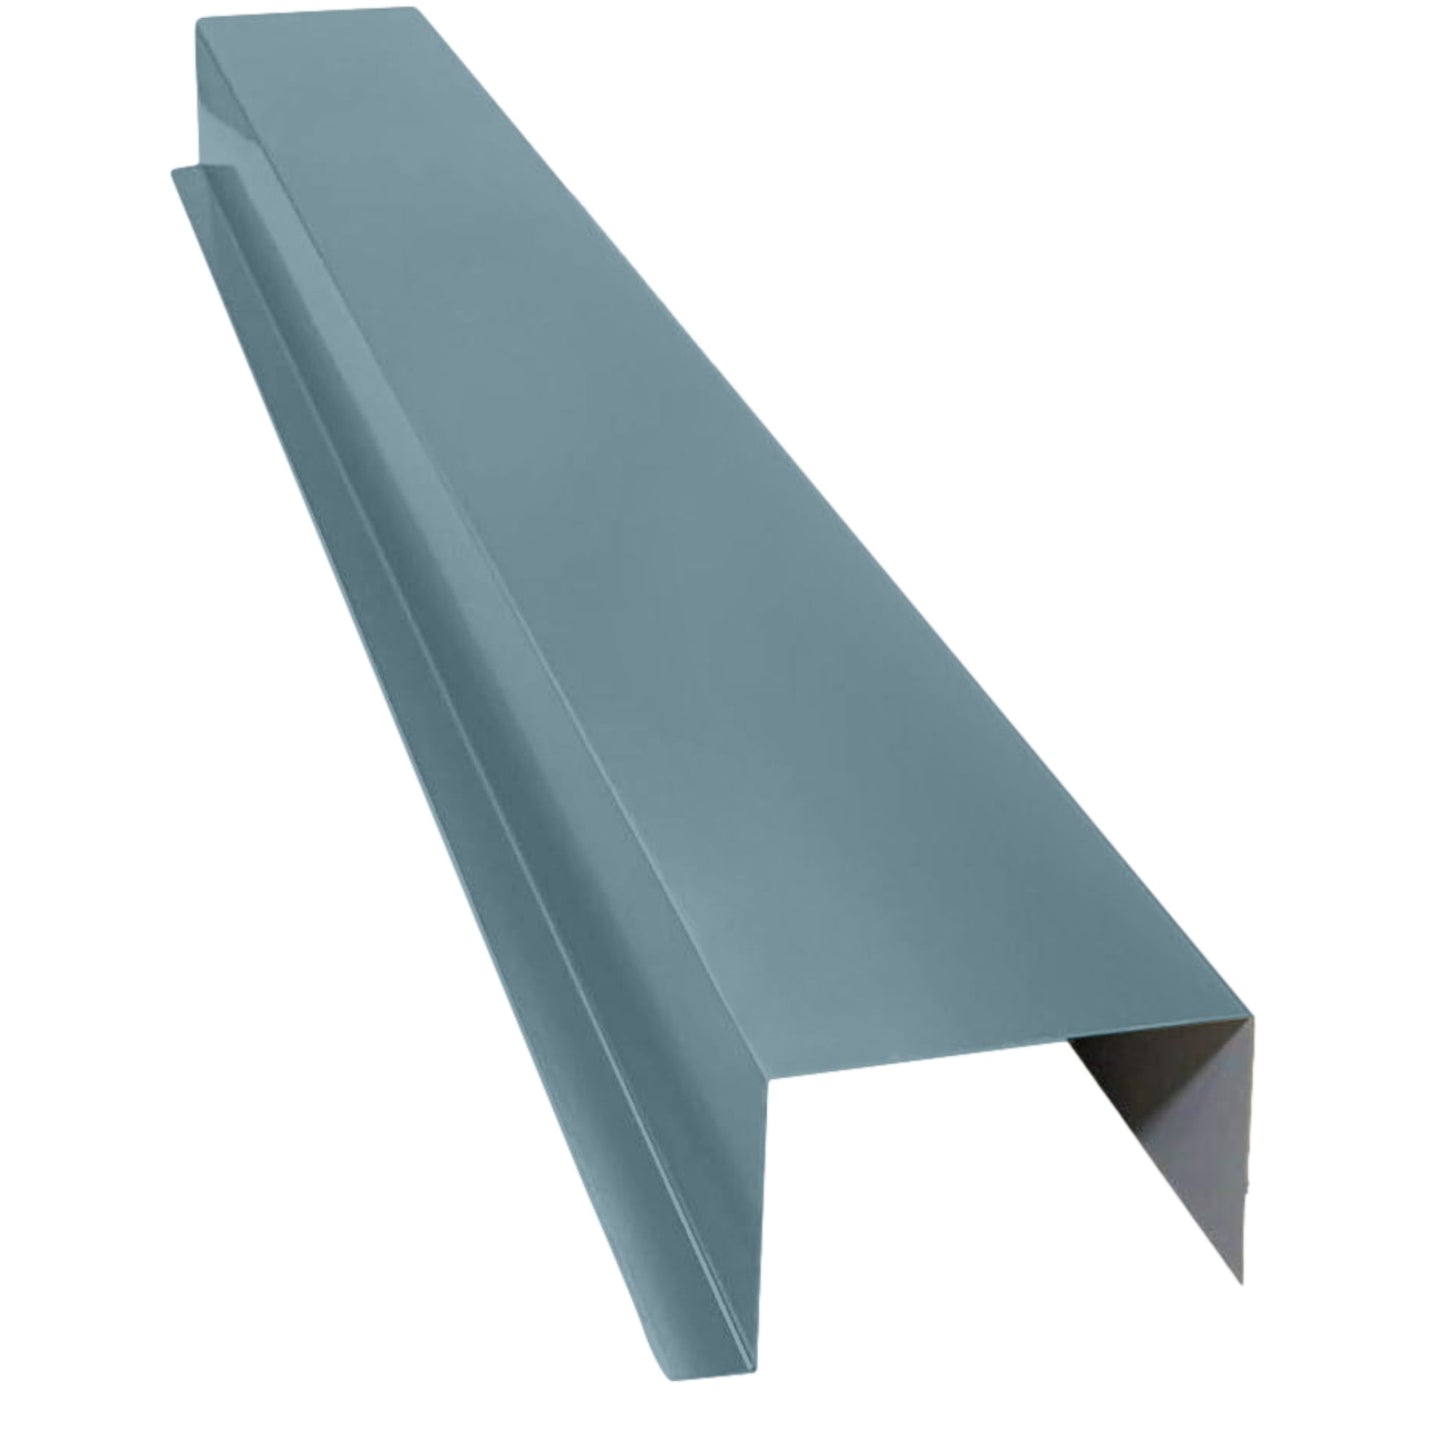 A long, gray, L-shaped metal Residential Series - Painted HVAC Line Set Cover Extensions - Additional 5 Foot Extension Section by Perma Cover, possibly used for roofing or construction purposes. The extension boasts a seamless and durable finish with a folded edge on one side and a slightly angled bent edge on the other. The surface appears smooth and uniform.